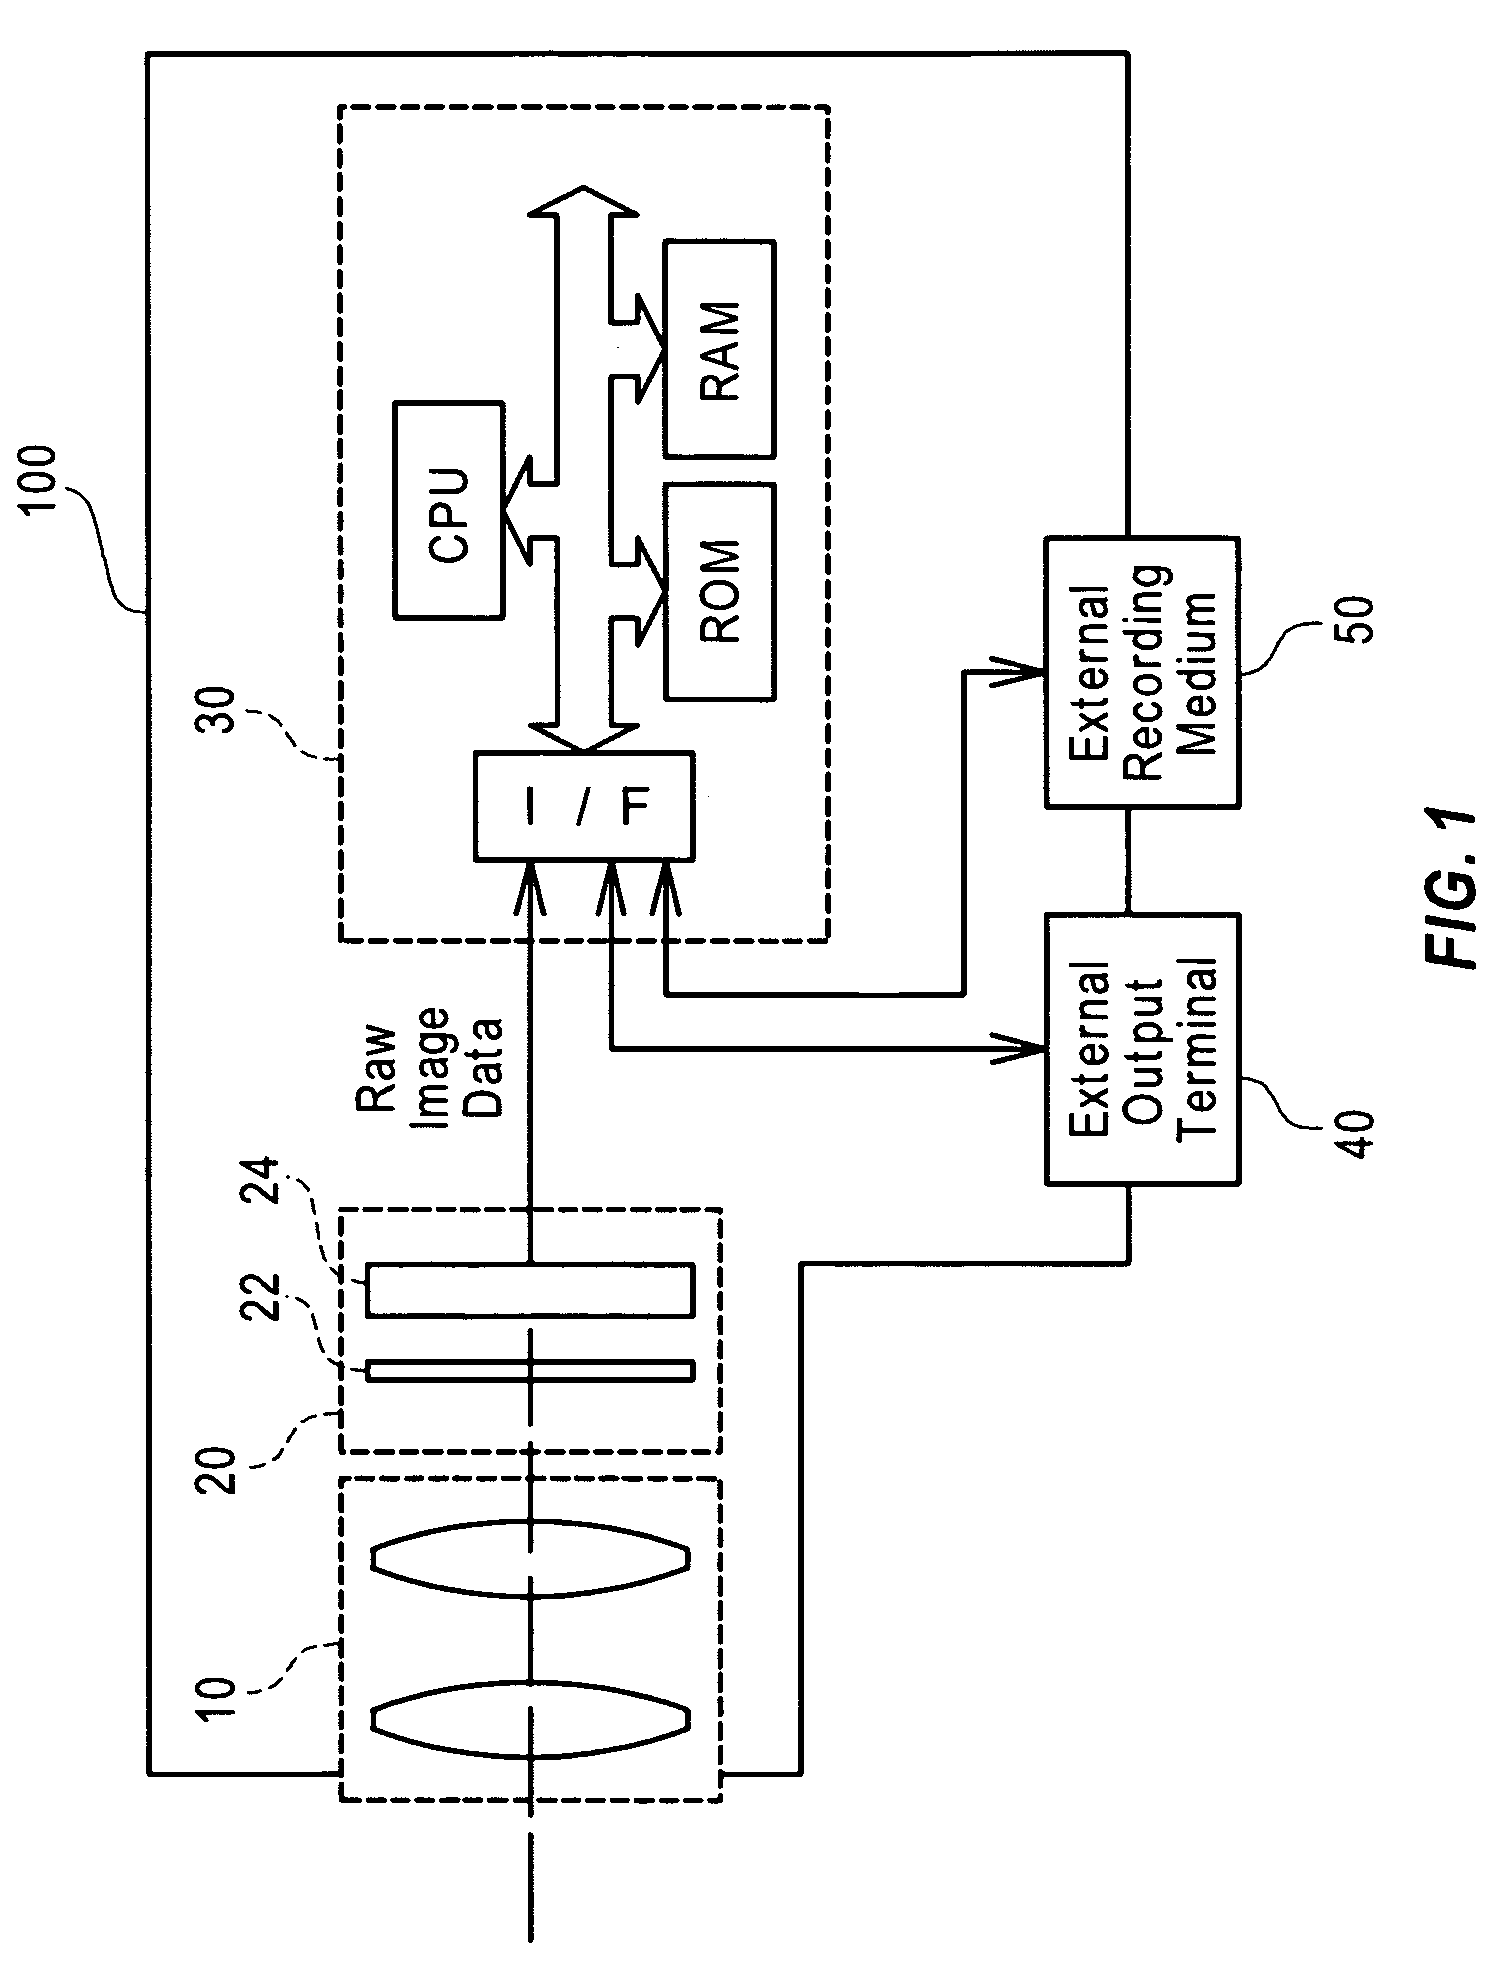 Image processing procedure for receiving mosaic image data and calculating vertical and horizontal-direction color difference components for each pixel